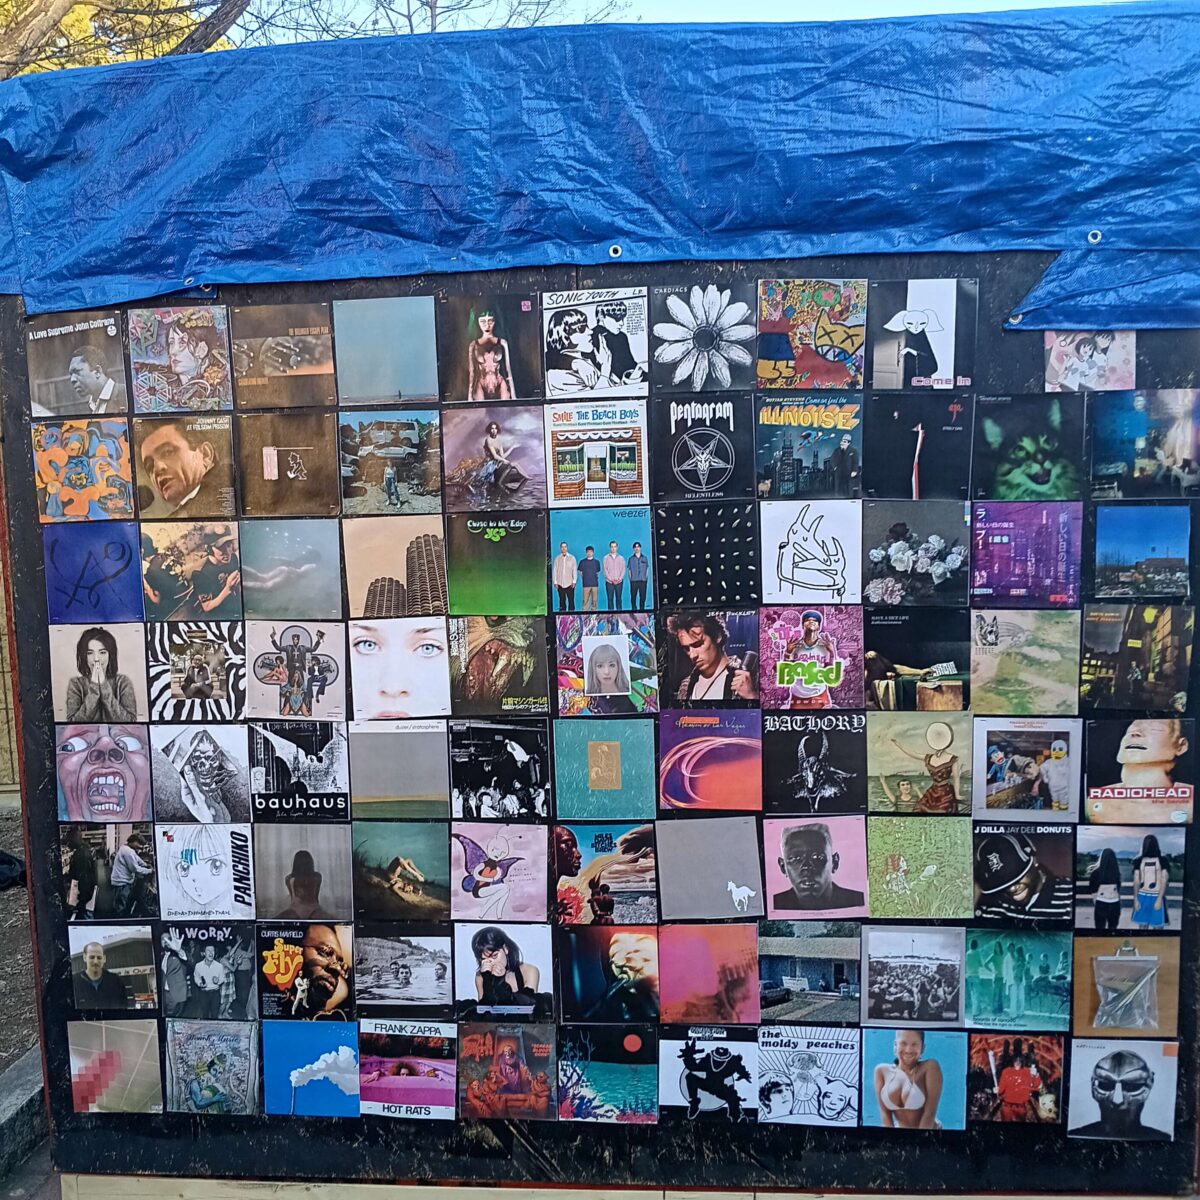 A wall of a plywood shack covered in various album covers.